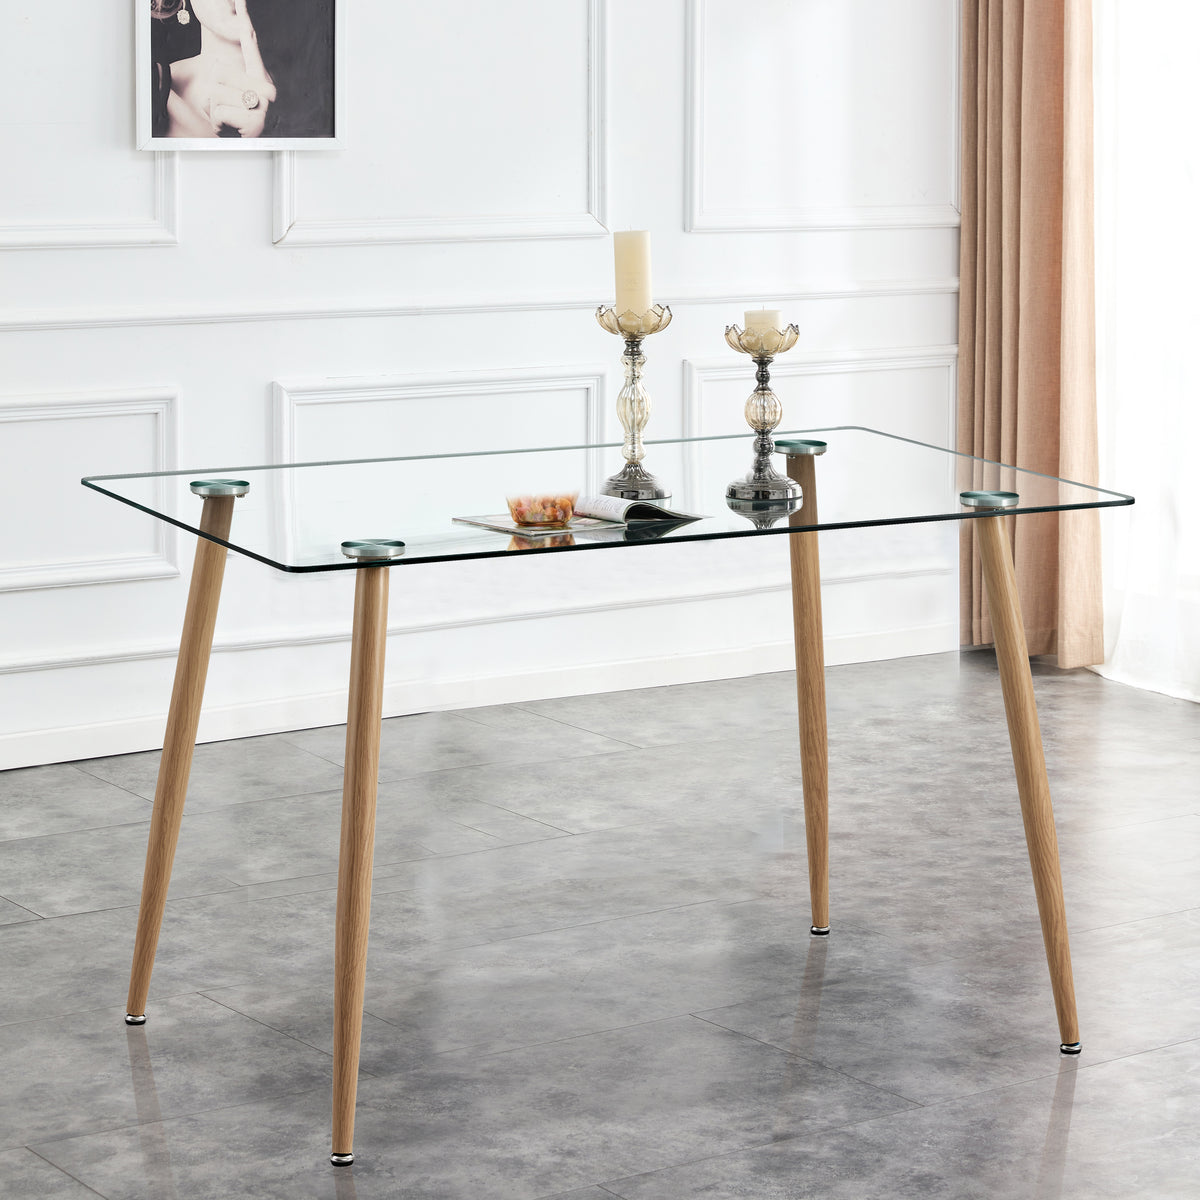 Modern Minimalist Rectangular Glass Dining Table for 4-6 with 0.31" Tempered Glass Tabletop and Wood color Coating Metal Legs - Transparent